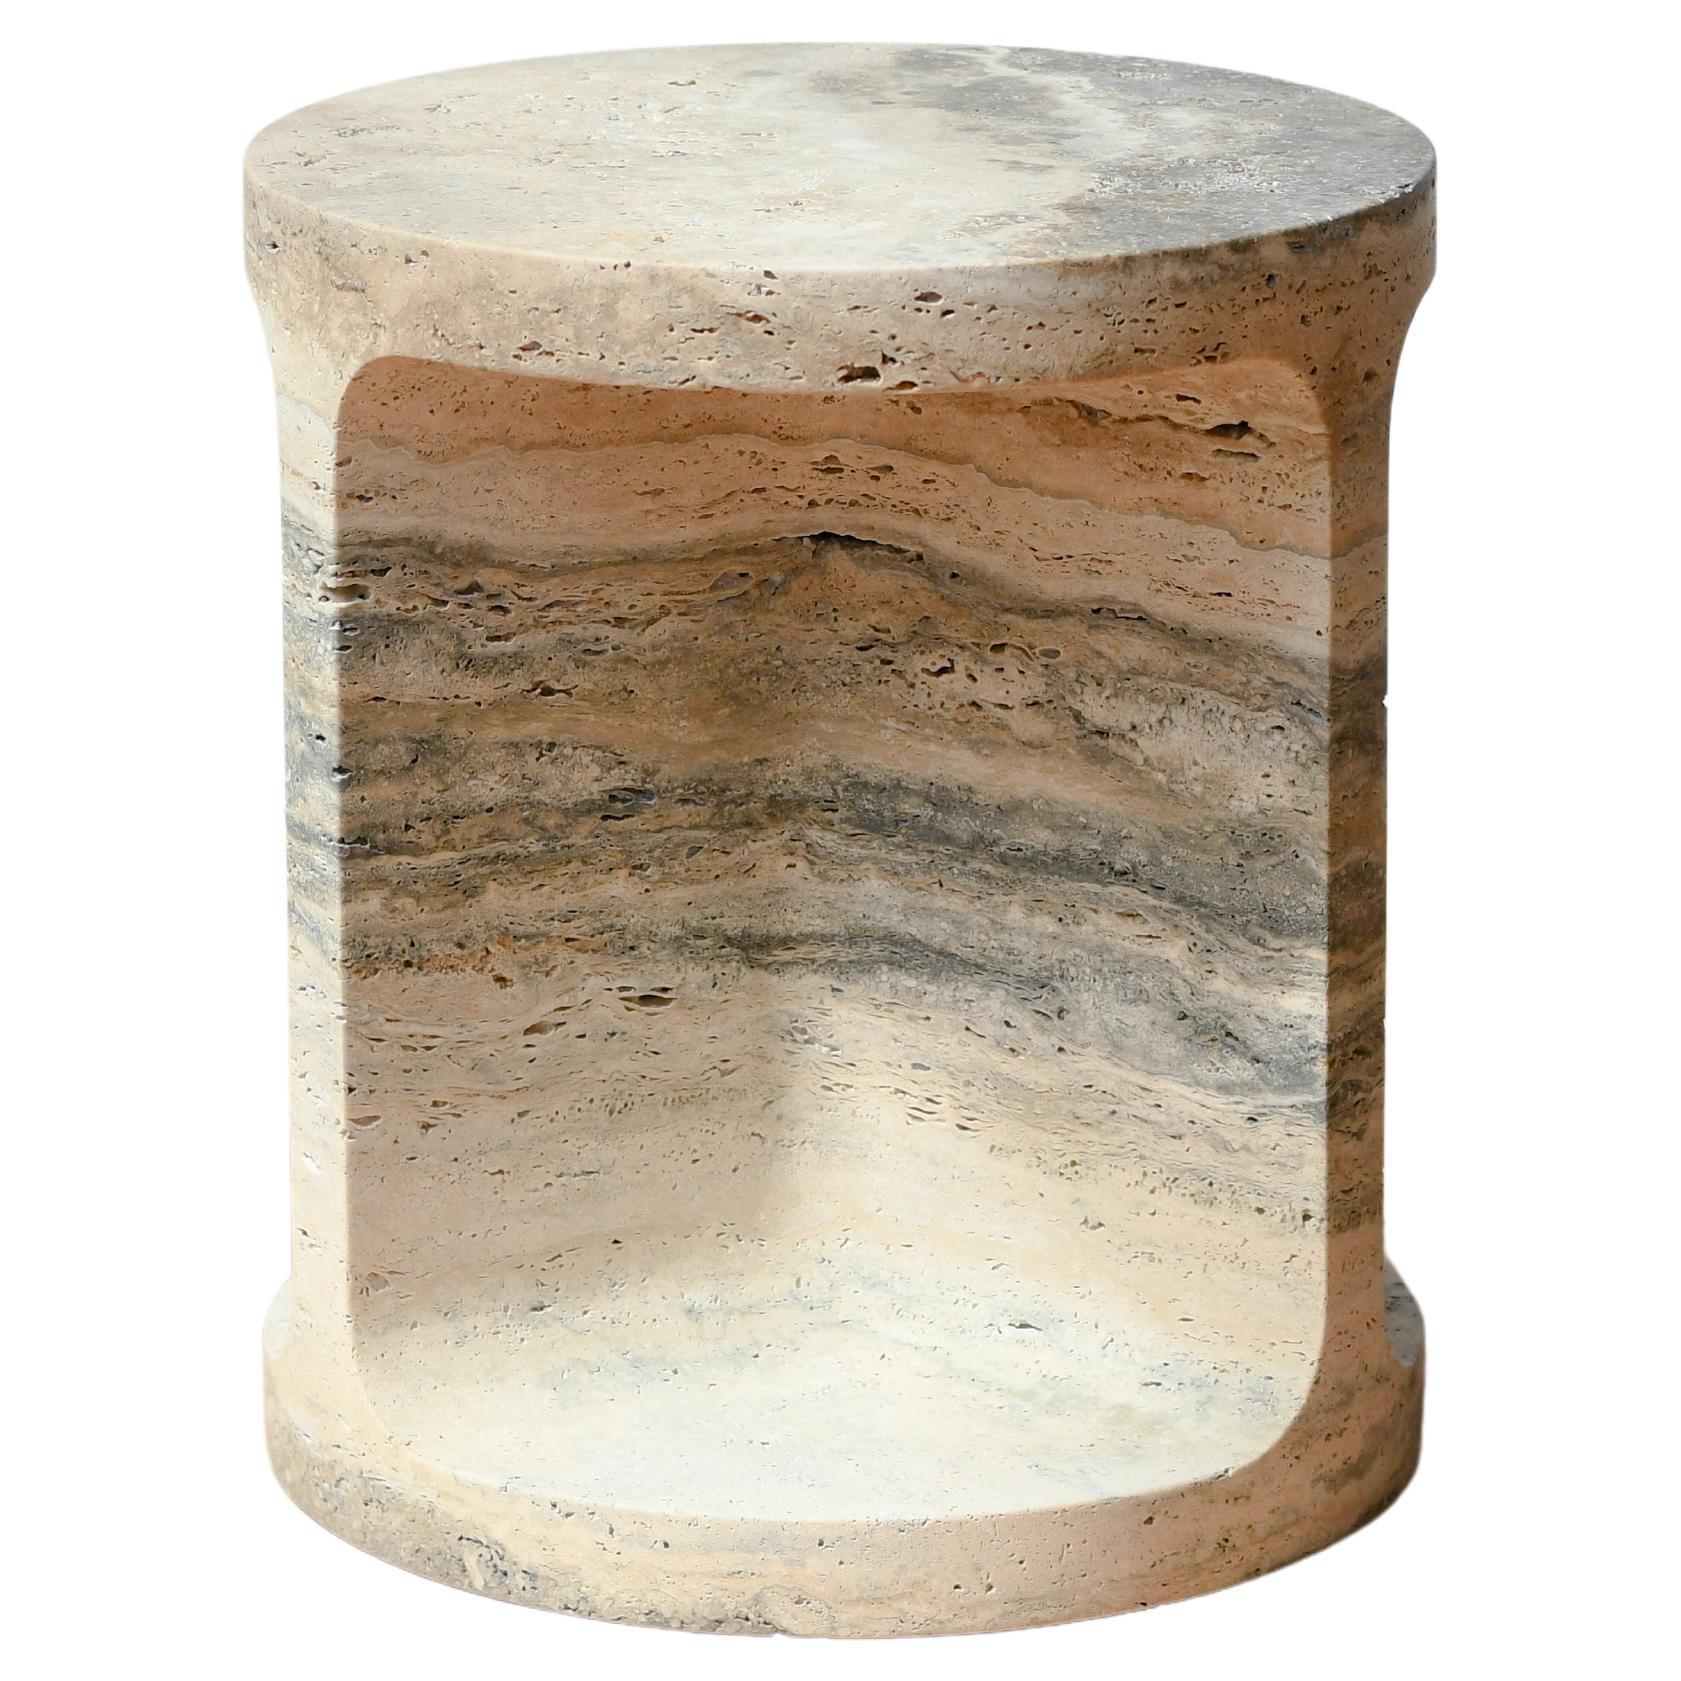 Neolith Stool and Side Table in Silver Travertine by Jeff Martin Joinery